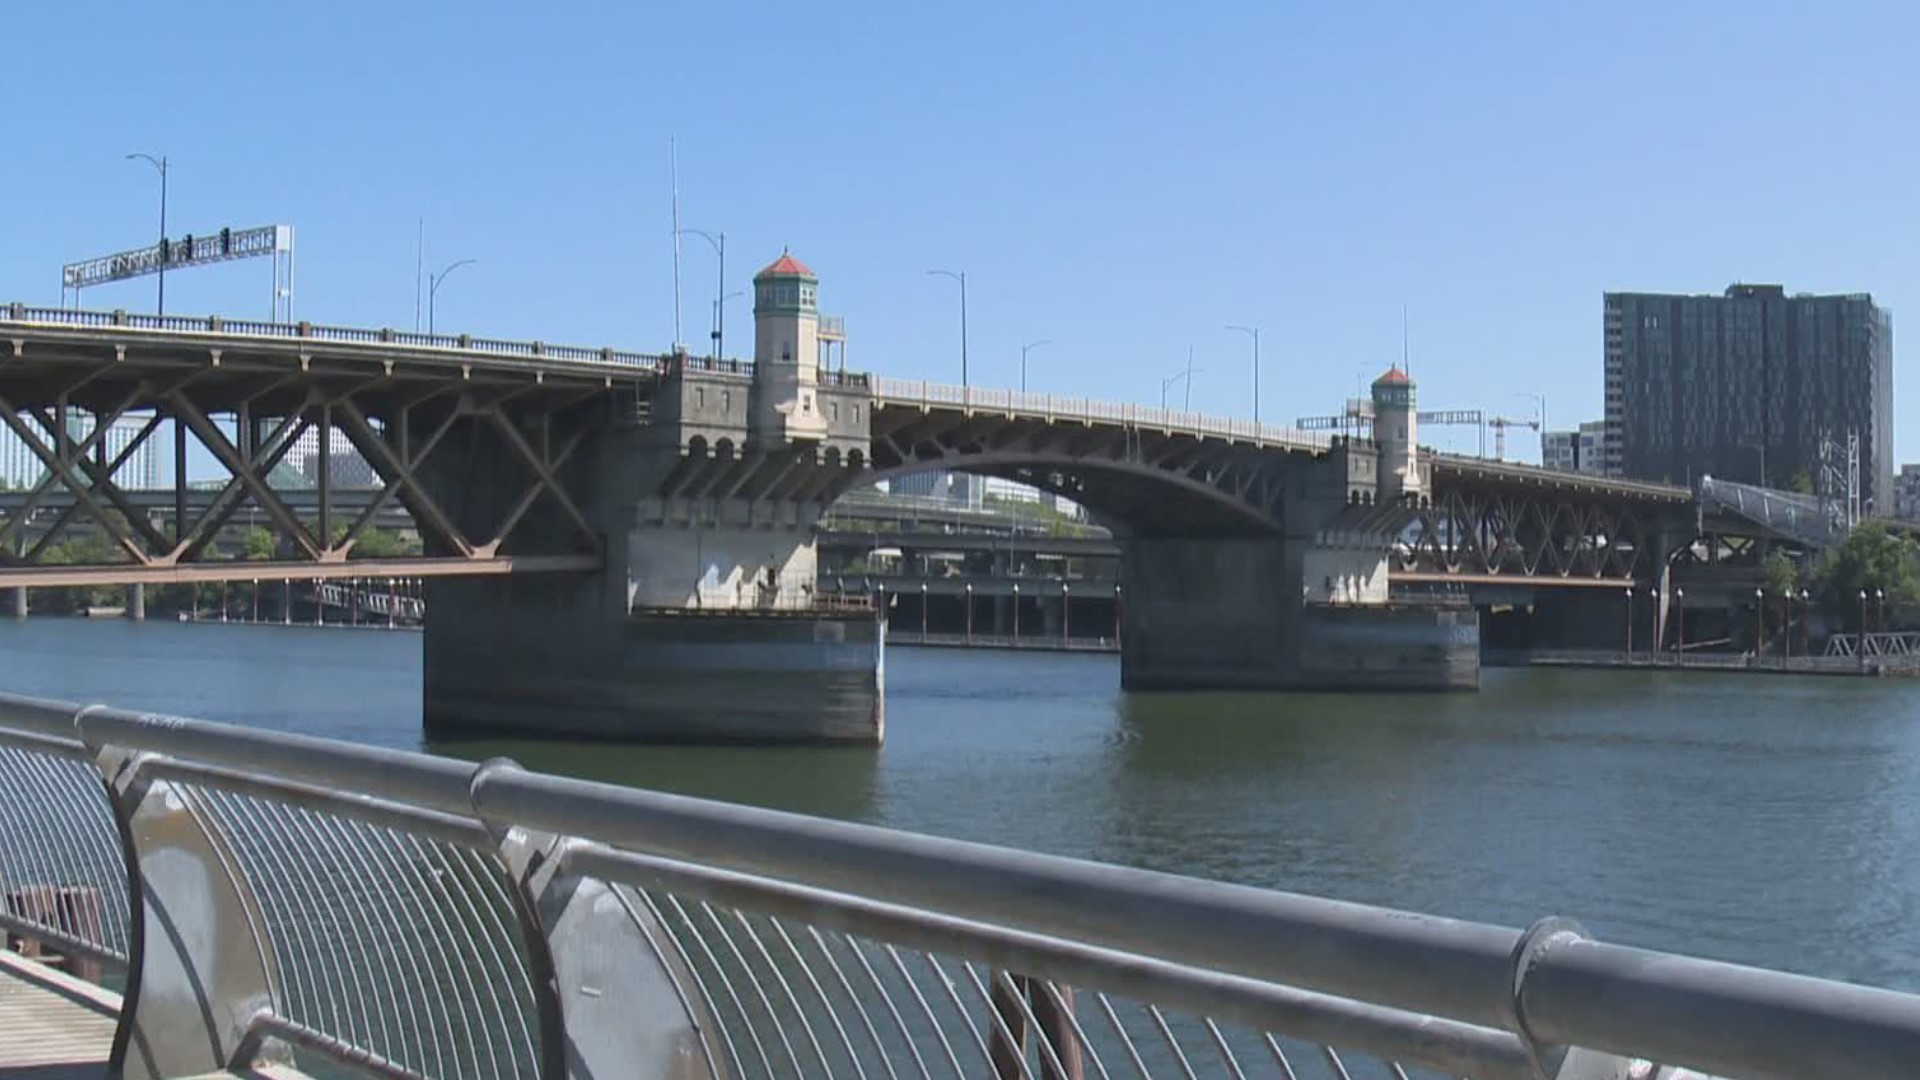 The design phase of the Burnside Bridge project starts in December. KGW traffic reporter Chris McGinness dug into some questions about the cost of the project.